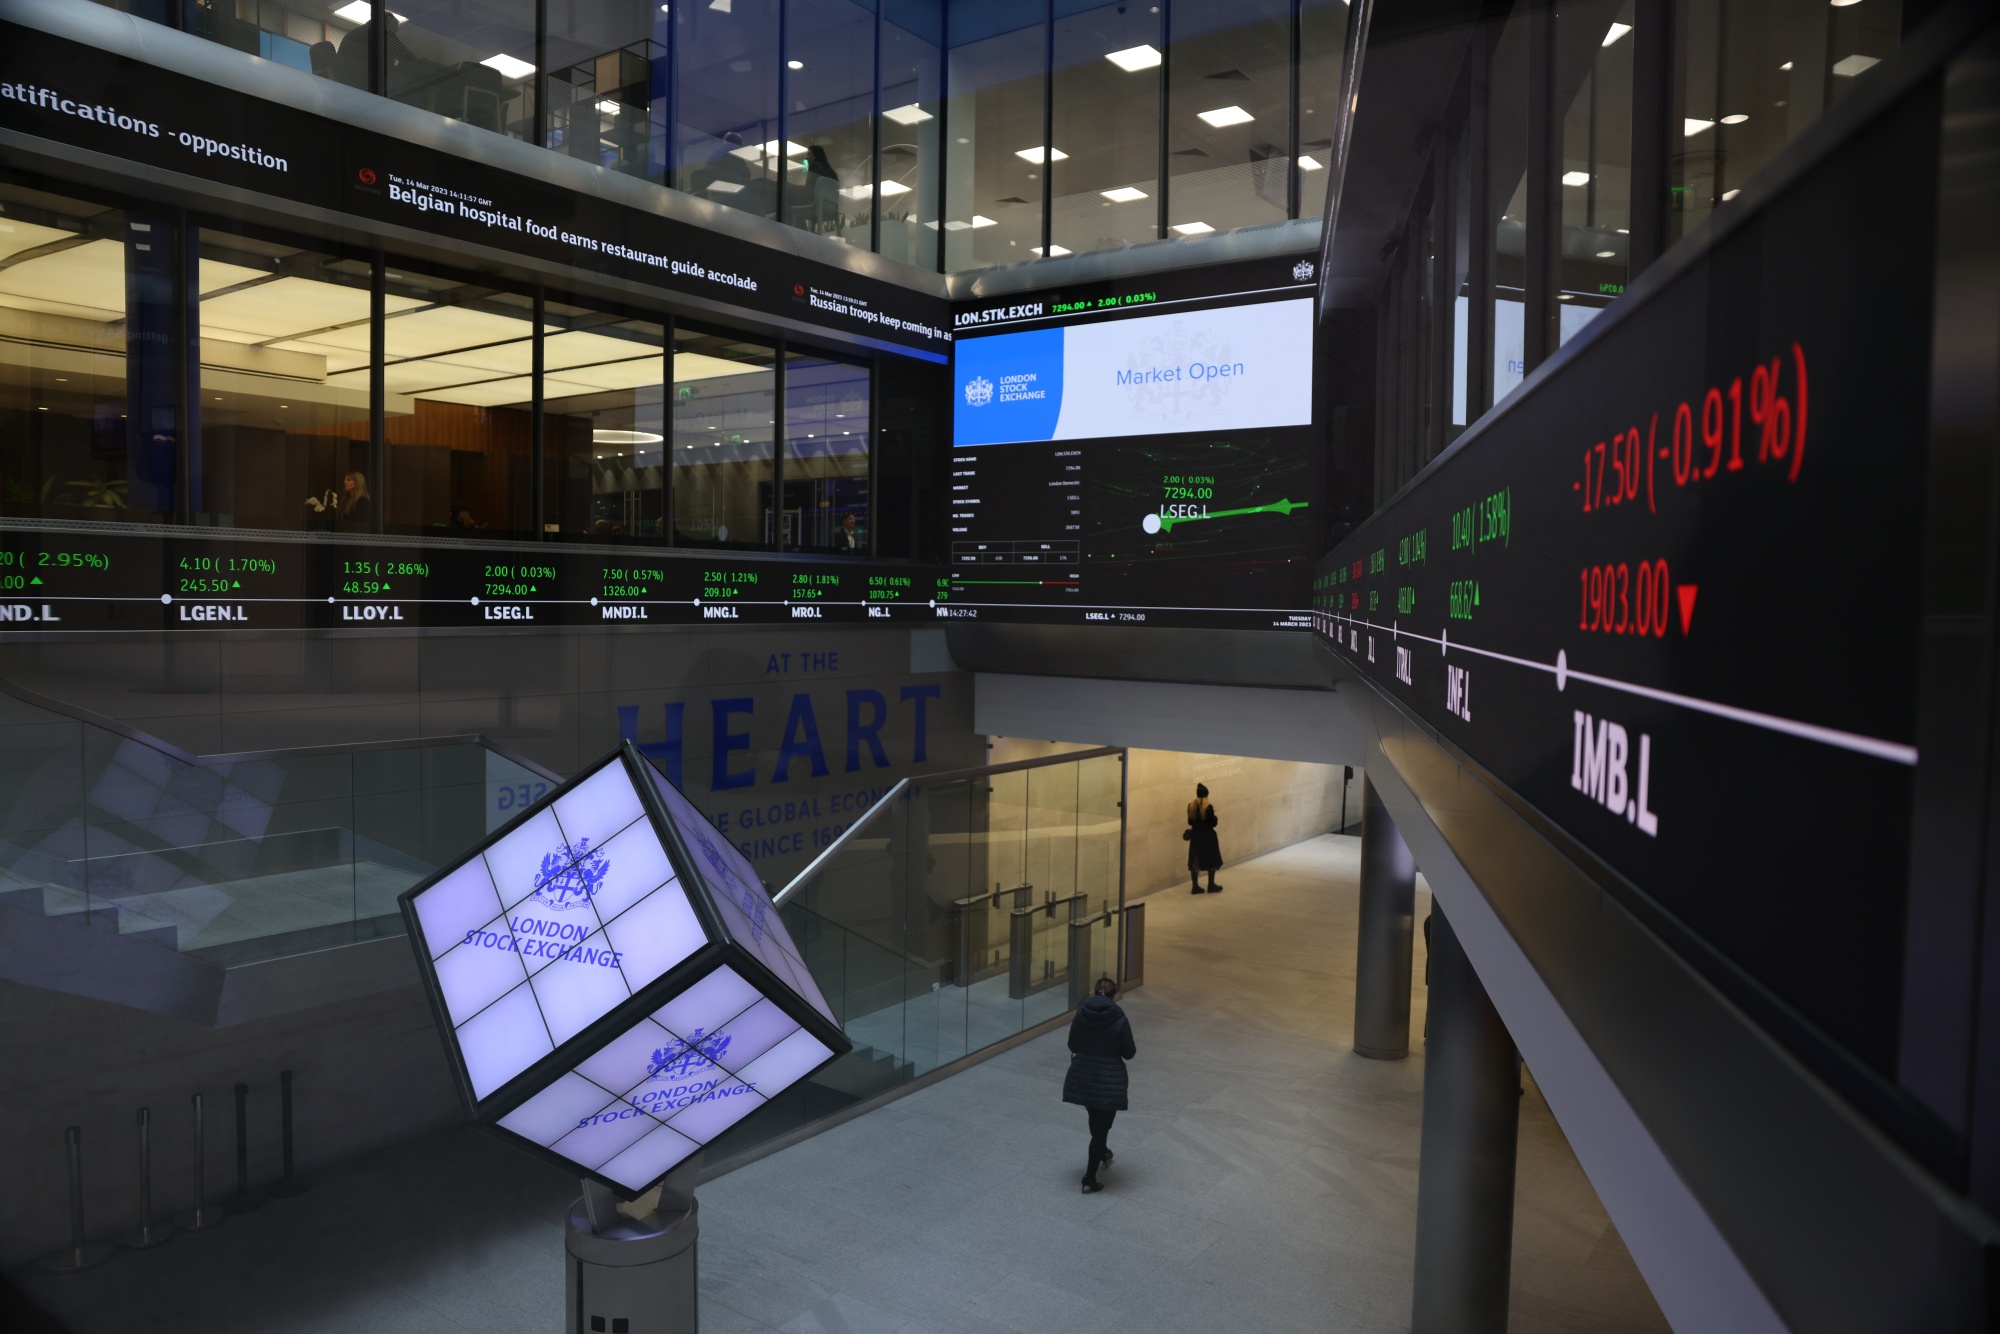 FTSE 100 Trading Volume Falls: Why the London Stock Exchange is Losing  Activity - Bloomberg